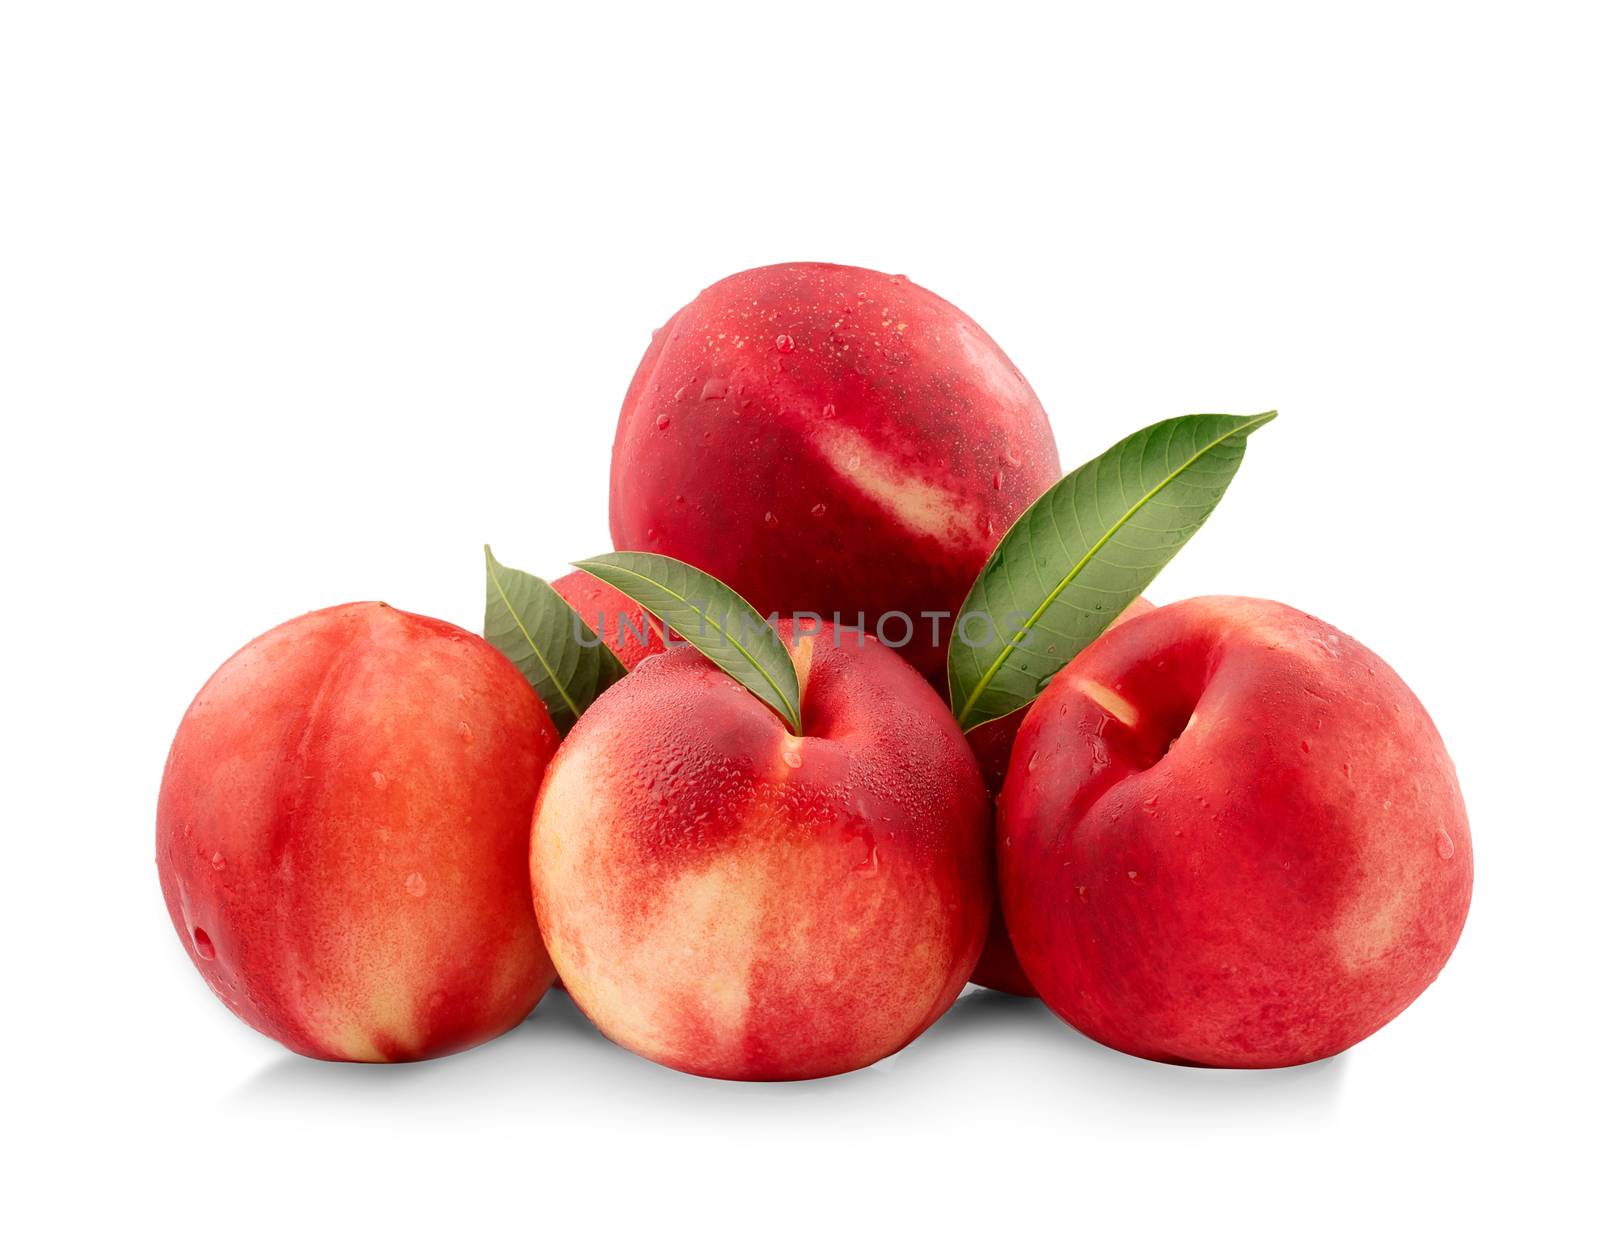 Nectarine peaches with slice and leaf isolated on white background